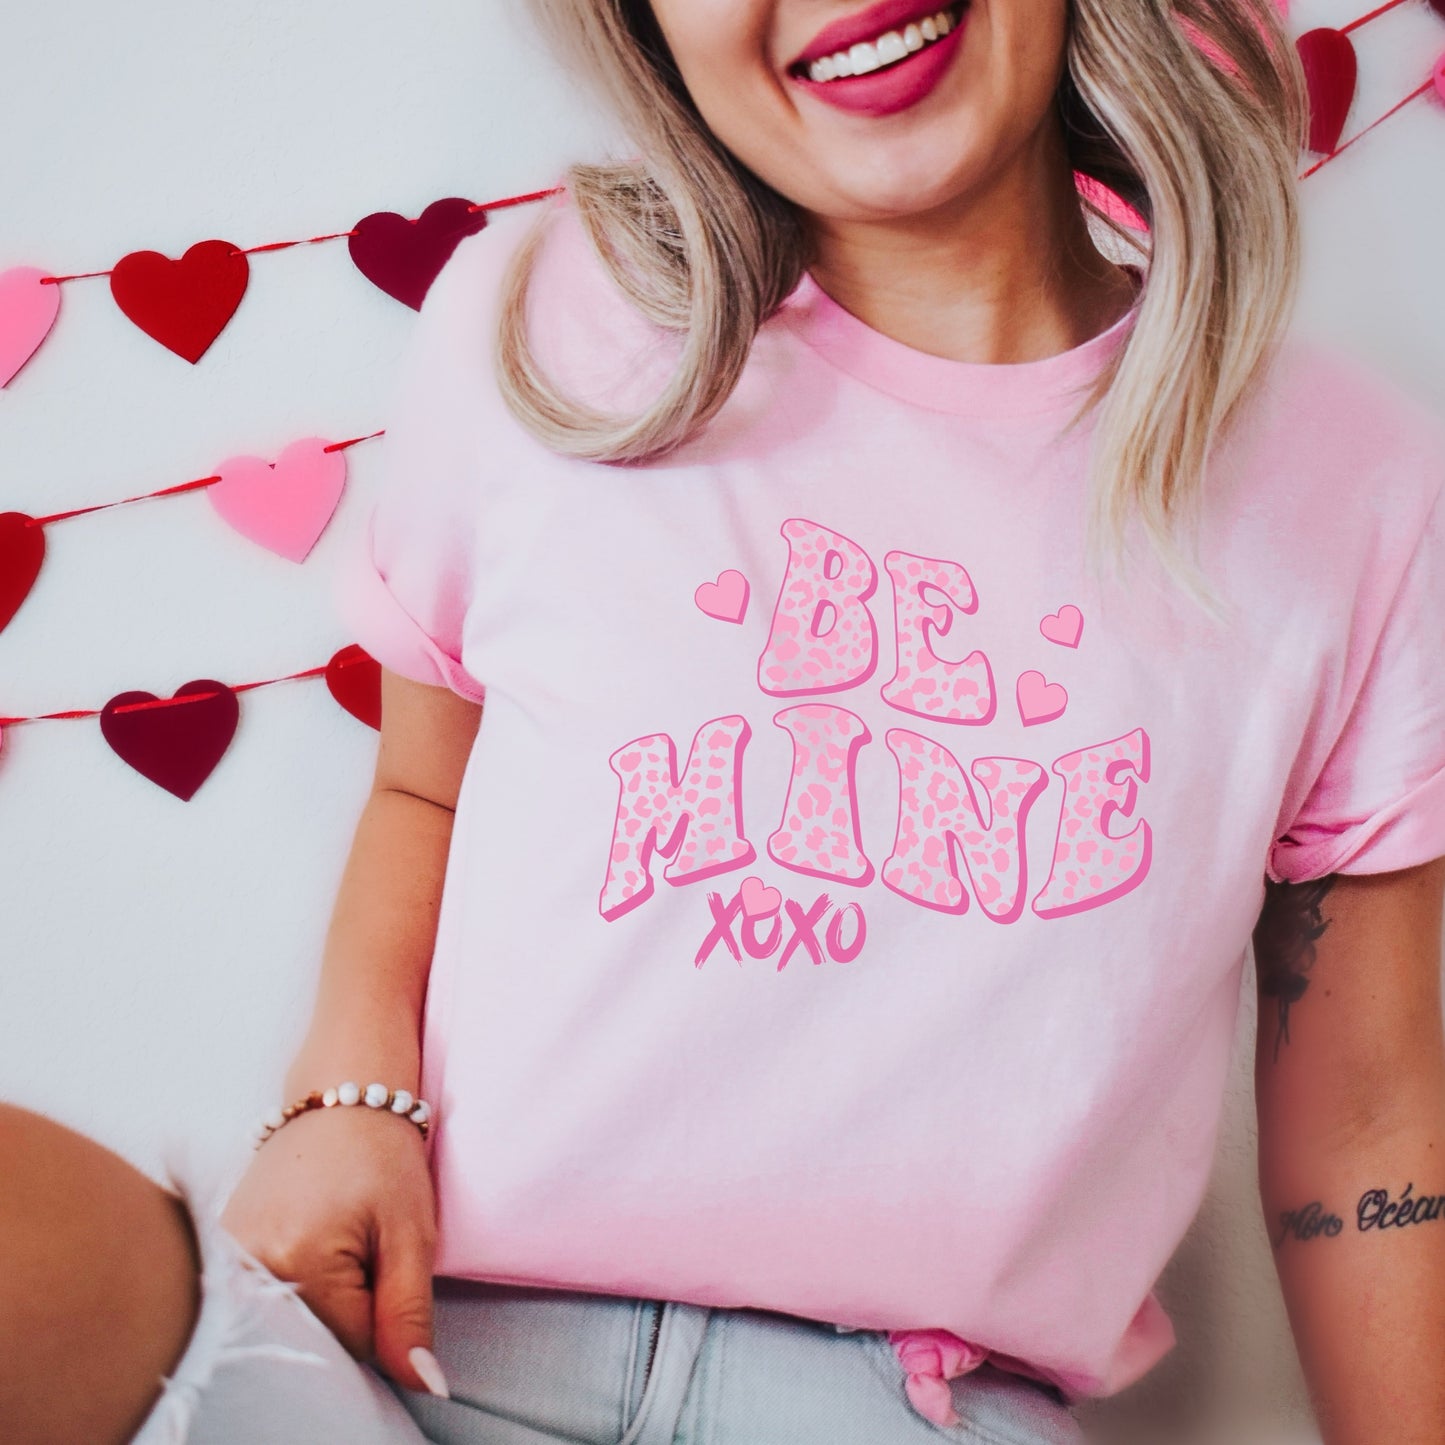 Pink shirt with a graphic iron-on that says "Be Mine XOXO" and a leopard print design heat transfer iron on